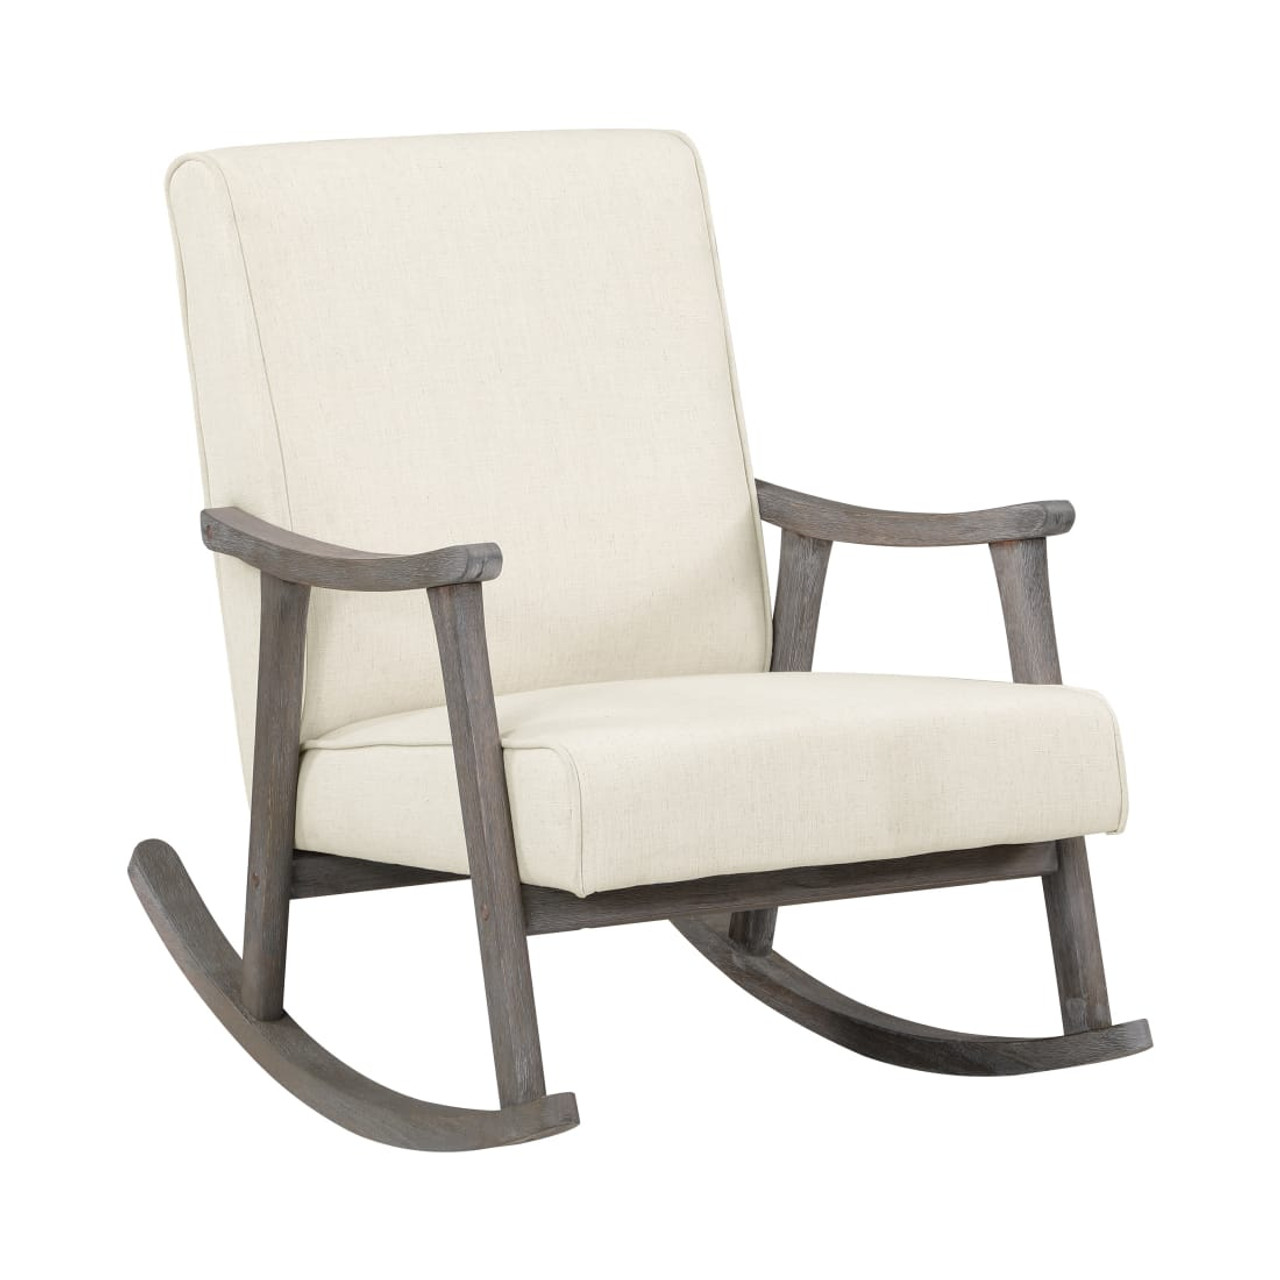 Gainsborough Rocker in Linen Fabric with Brushed Grey Finish Frame